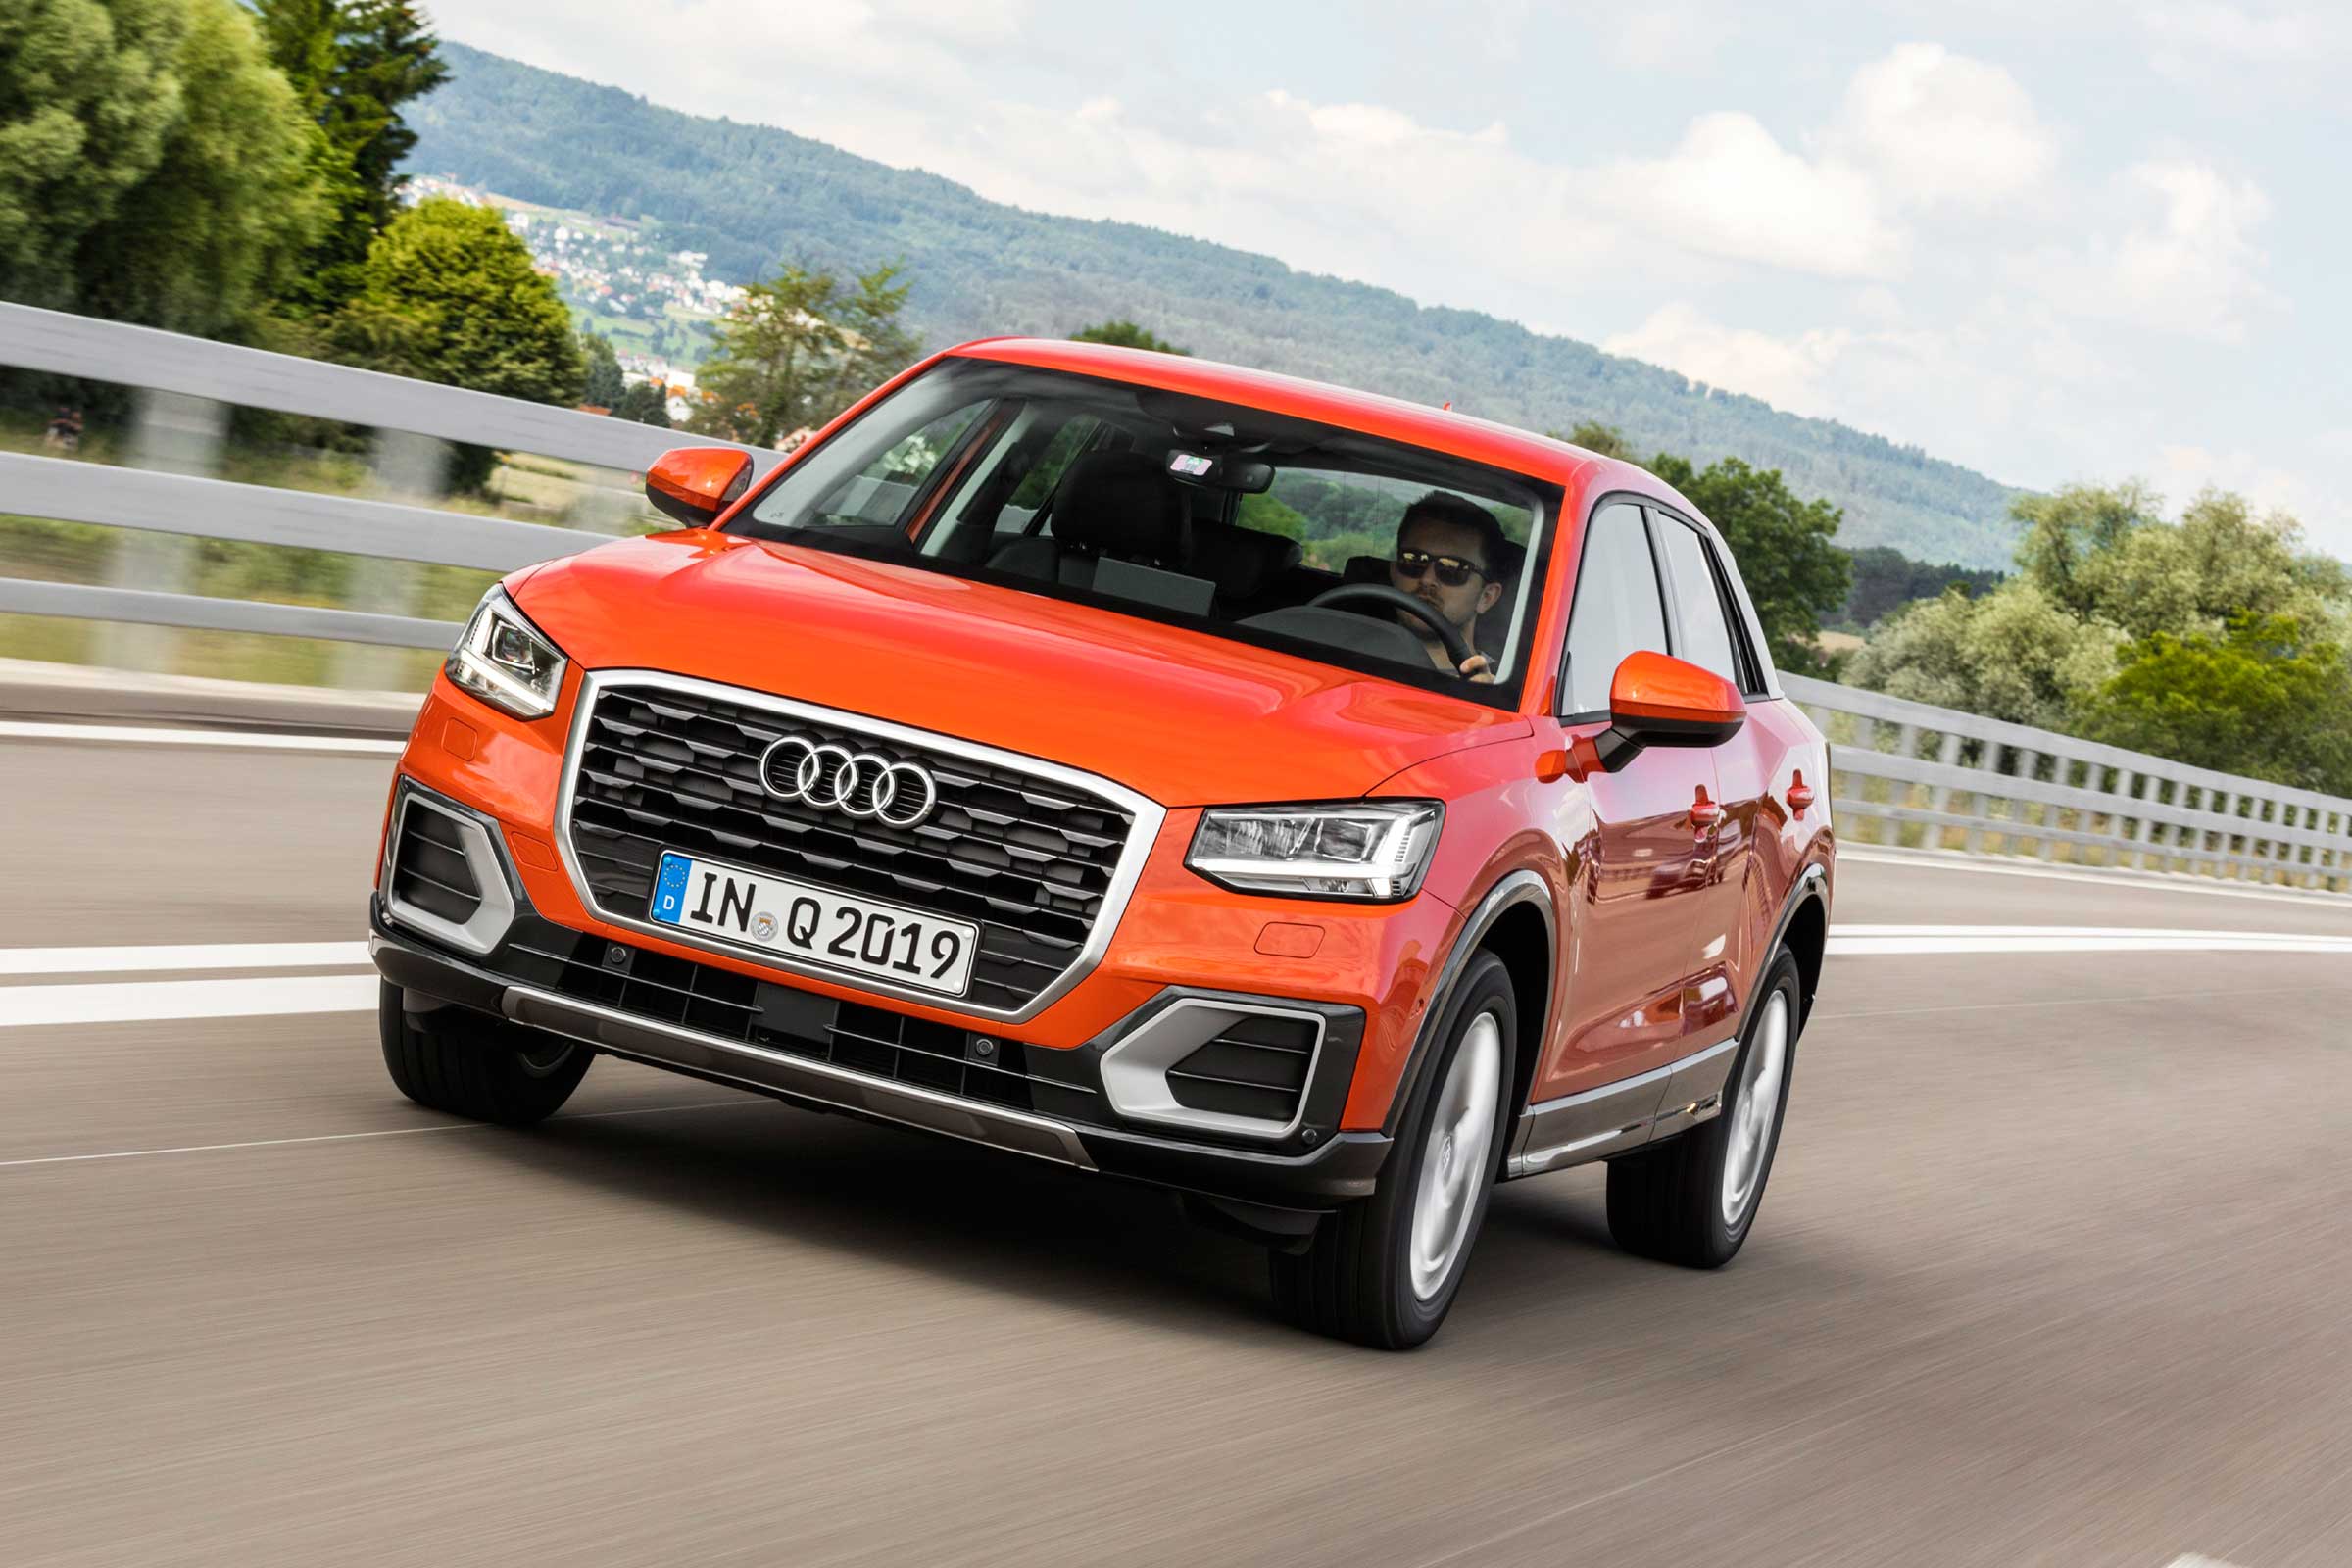 New Audi Q2 SUV full prices, specs and release date